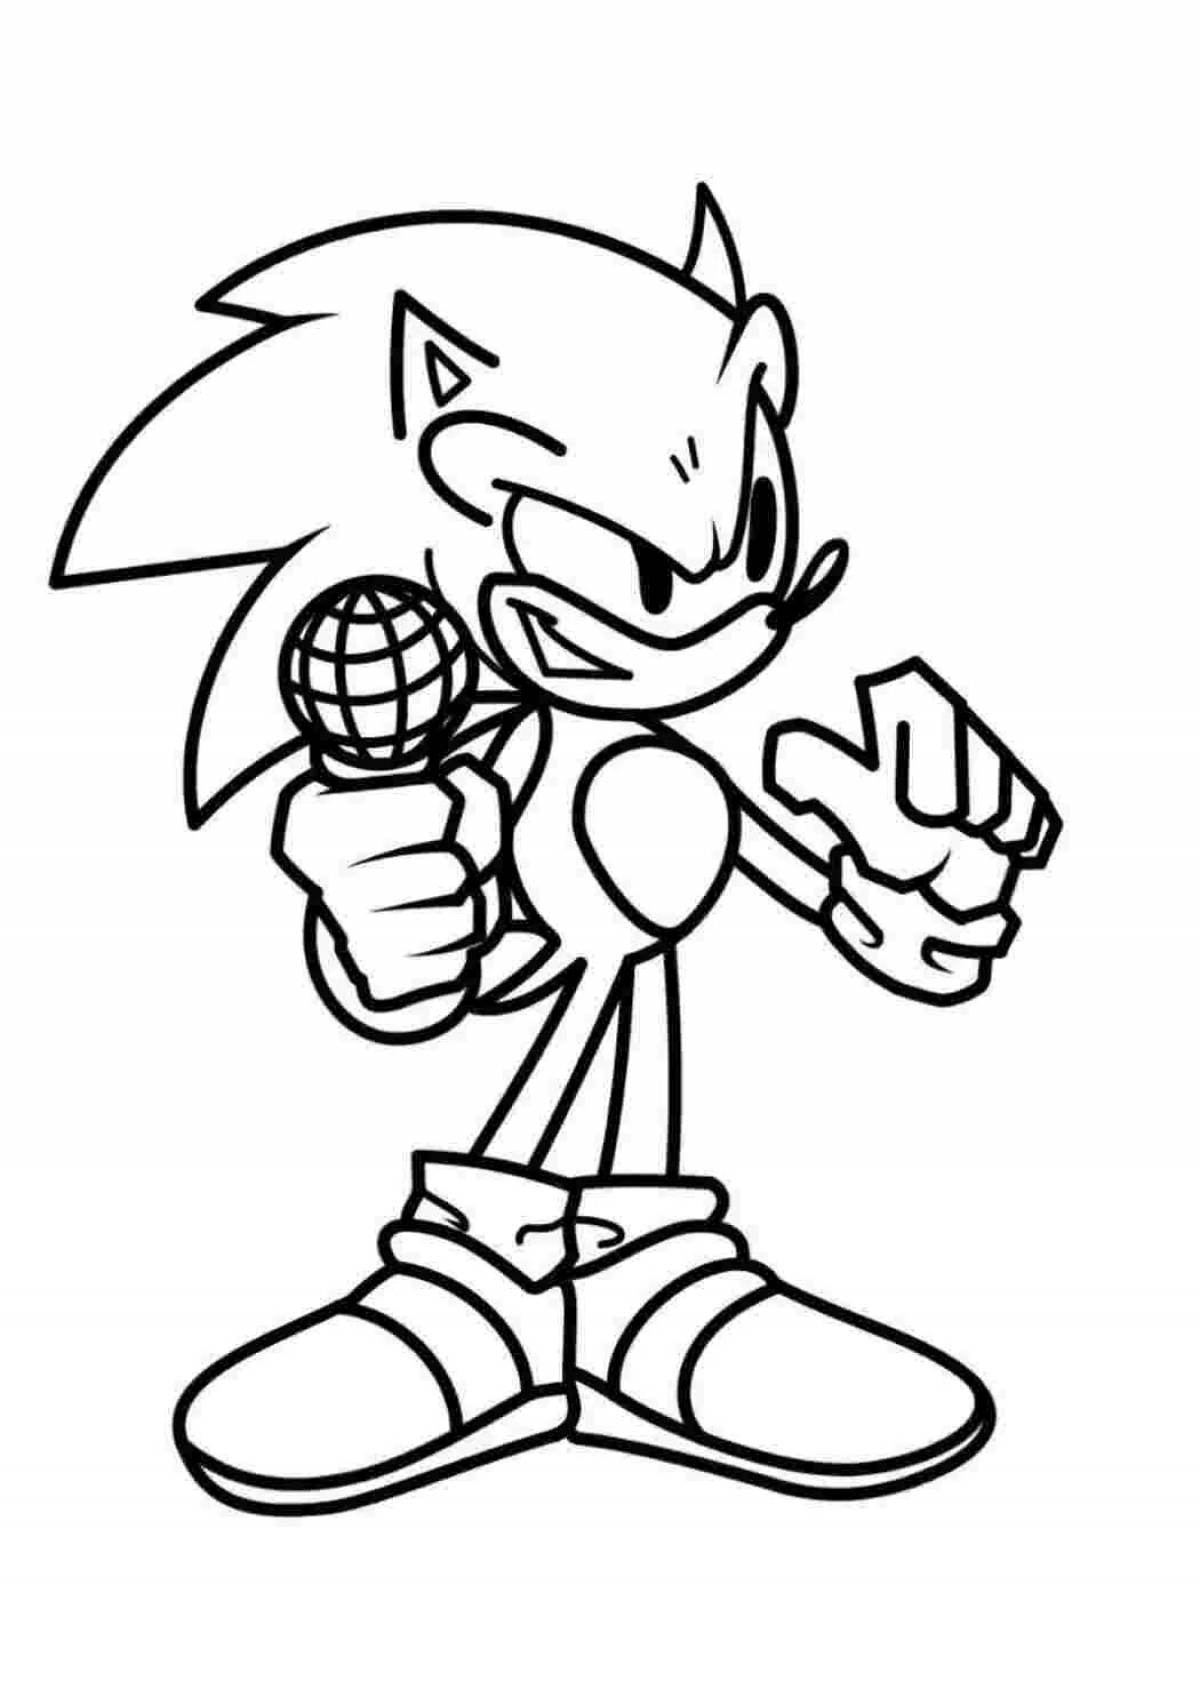 Rich darkspine sonic coloring page